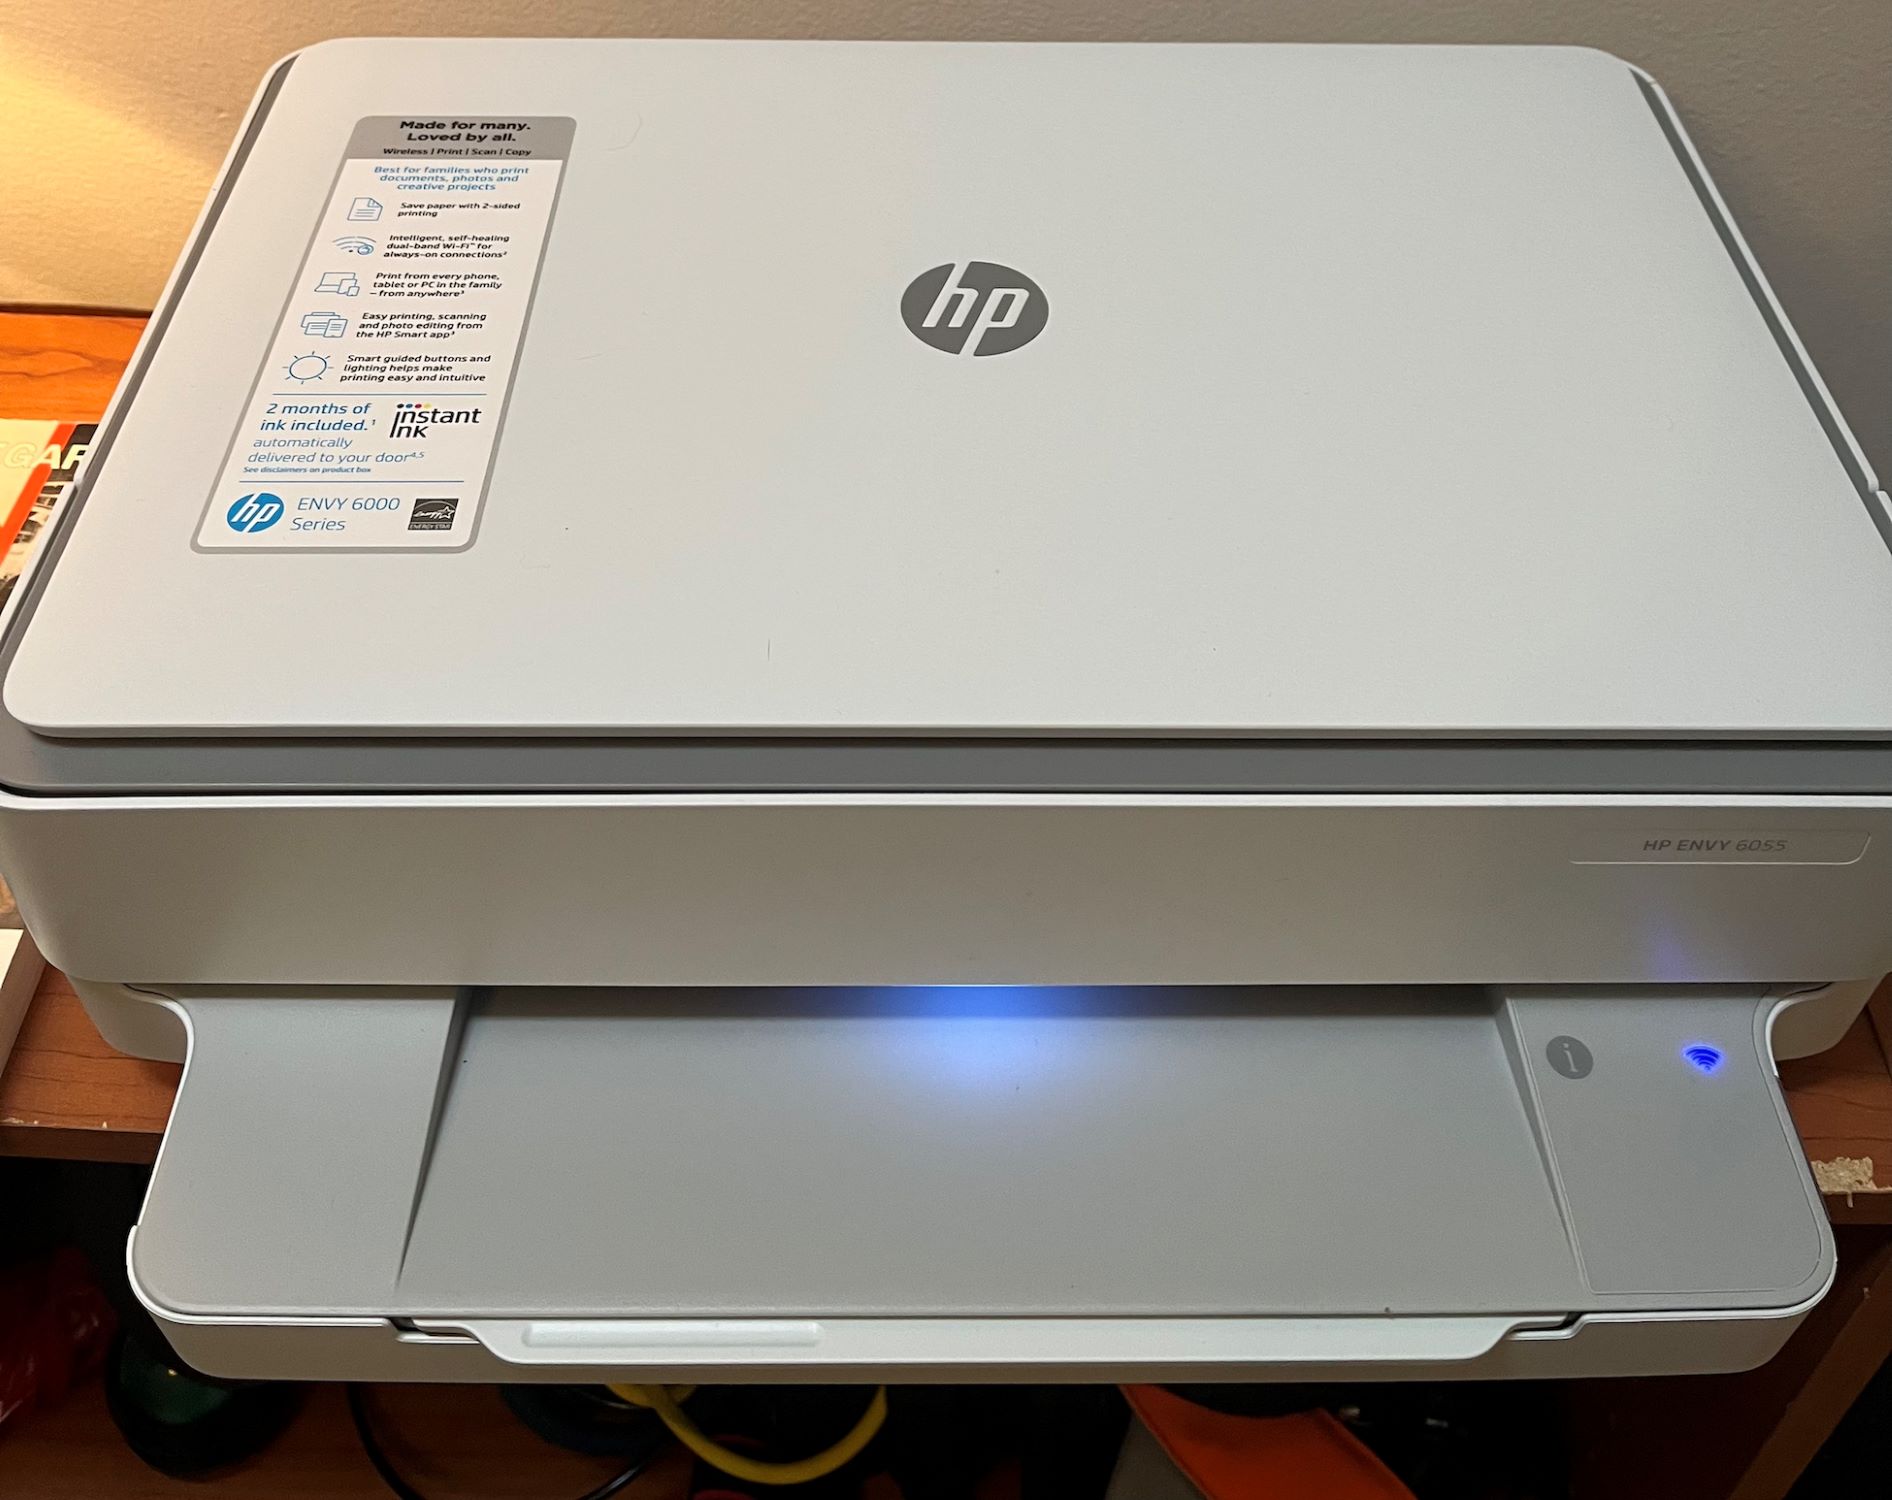 How To Find Password Of HP Deskjet 2700 All-In-One Printer, review ? 